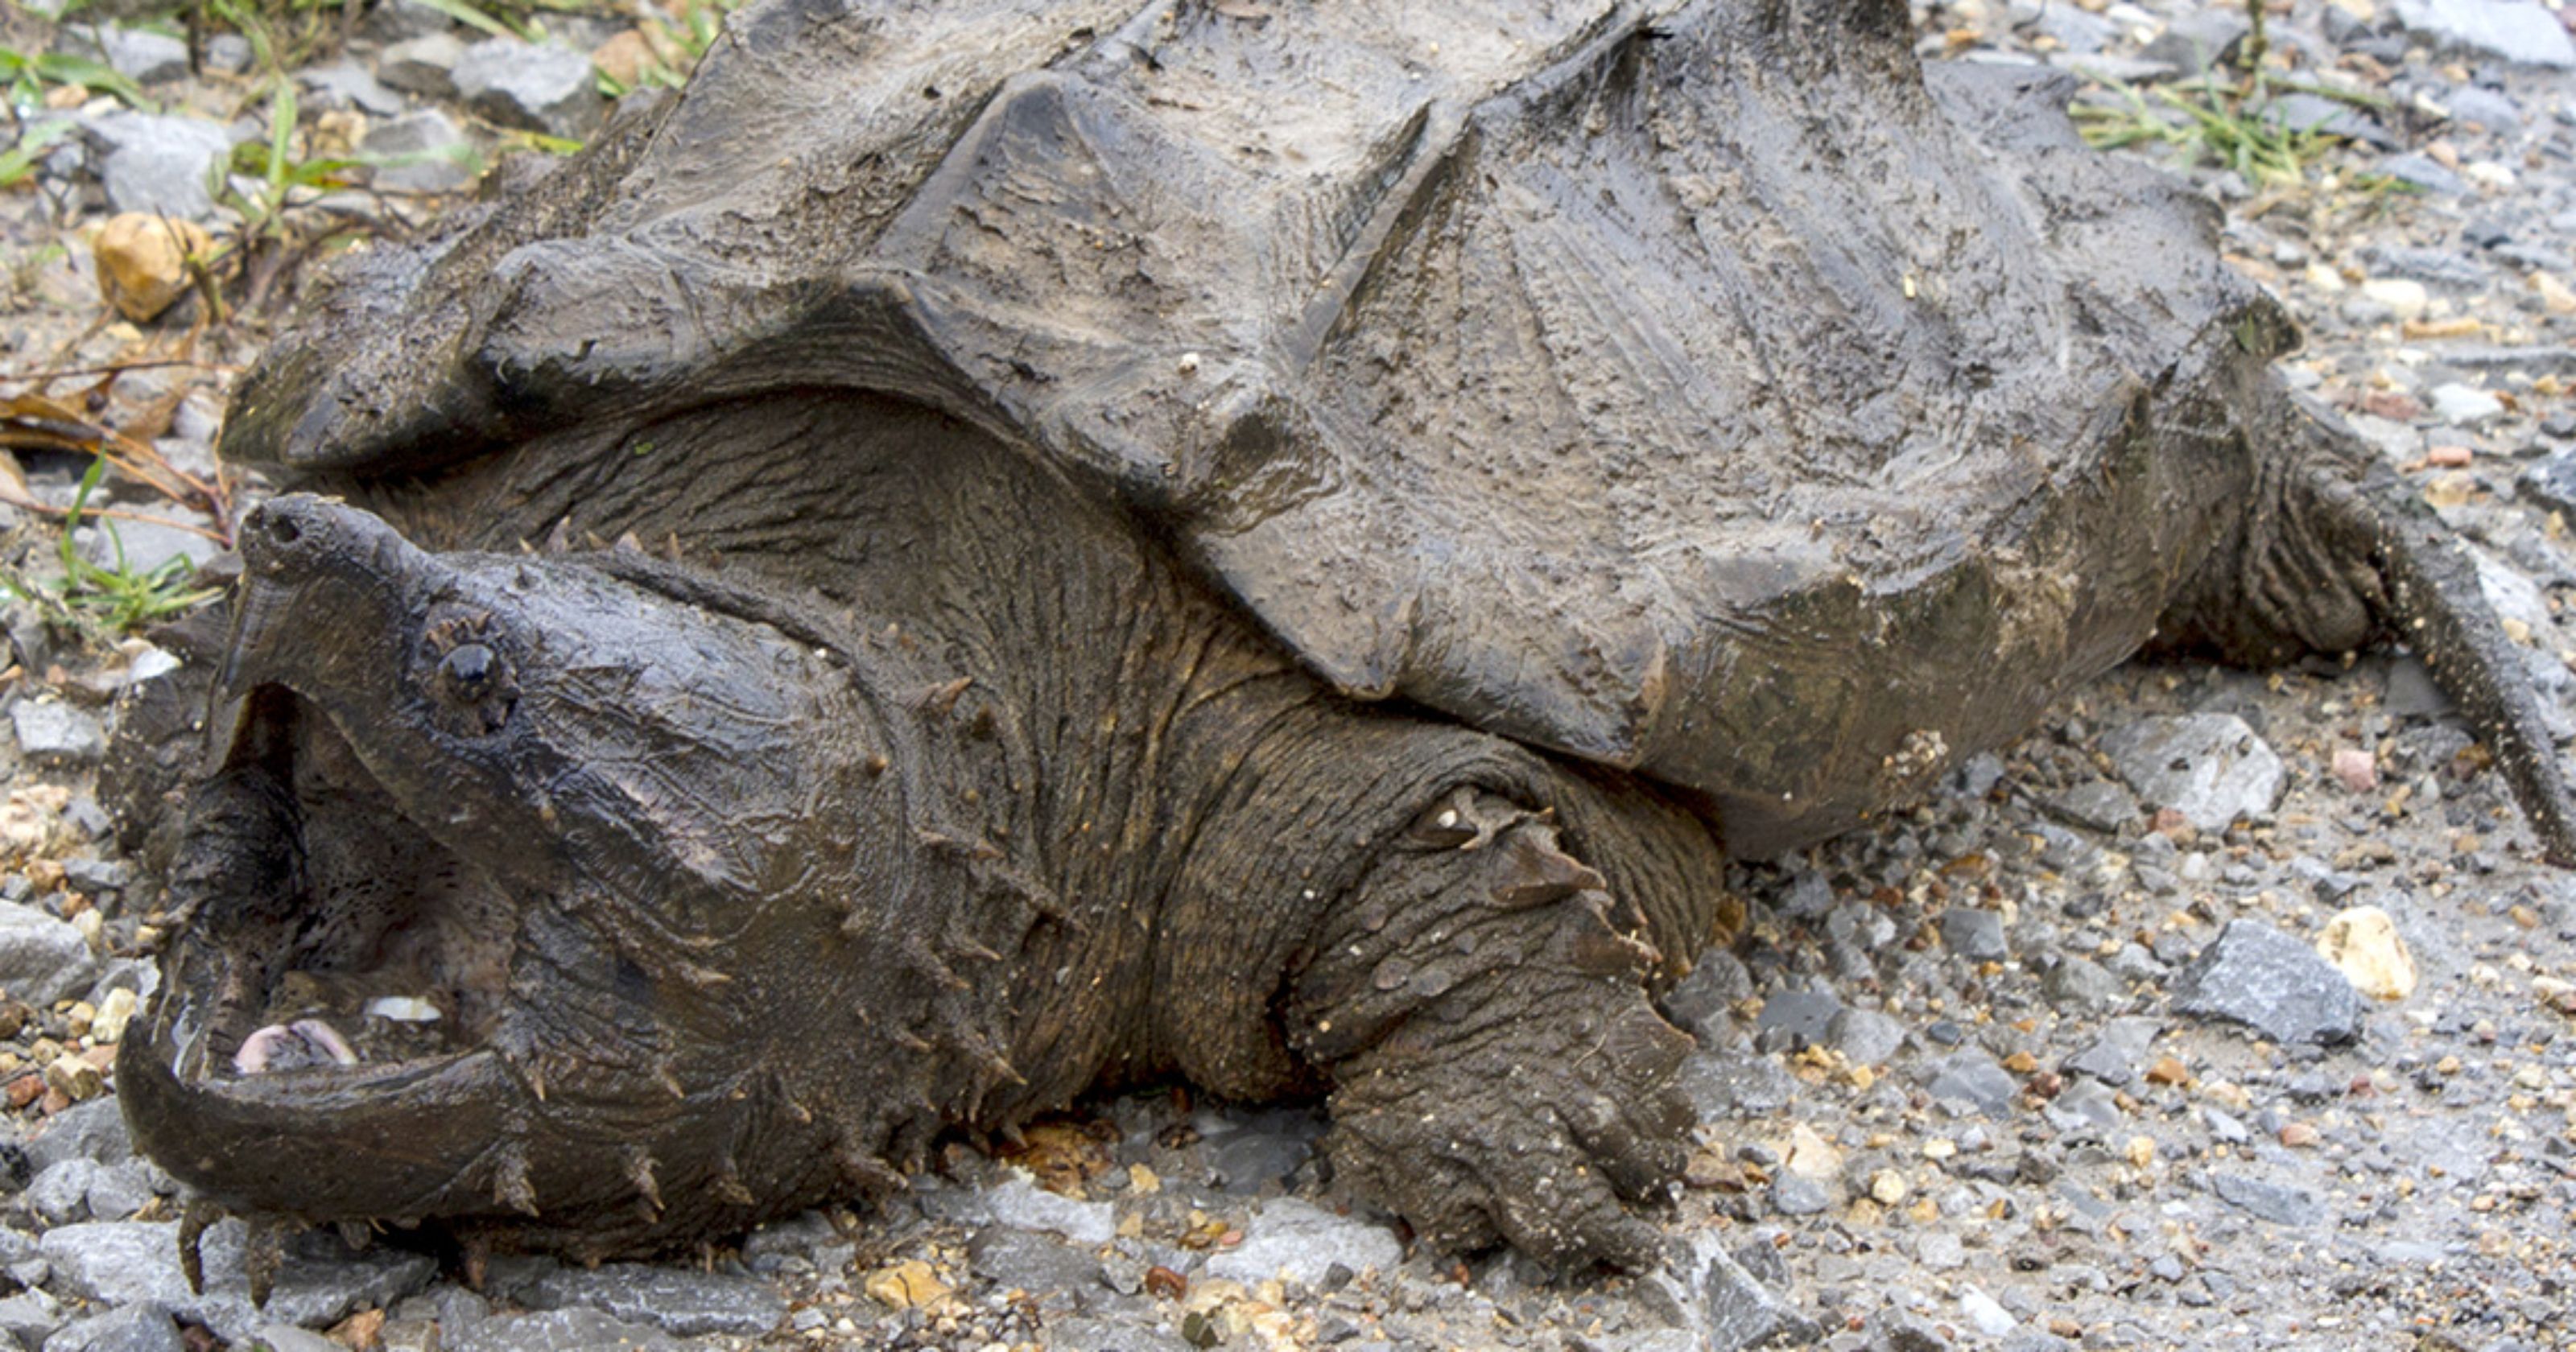 Alligator snapping turtle found wild in Illinois — first in 30 years